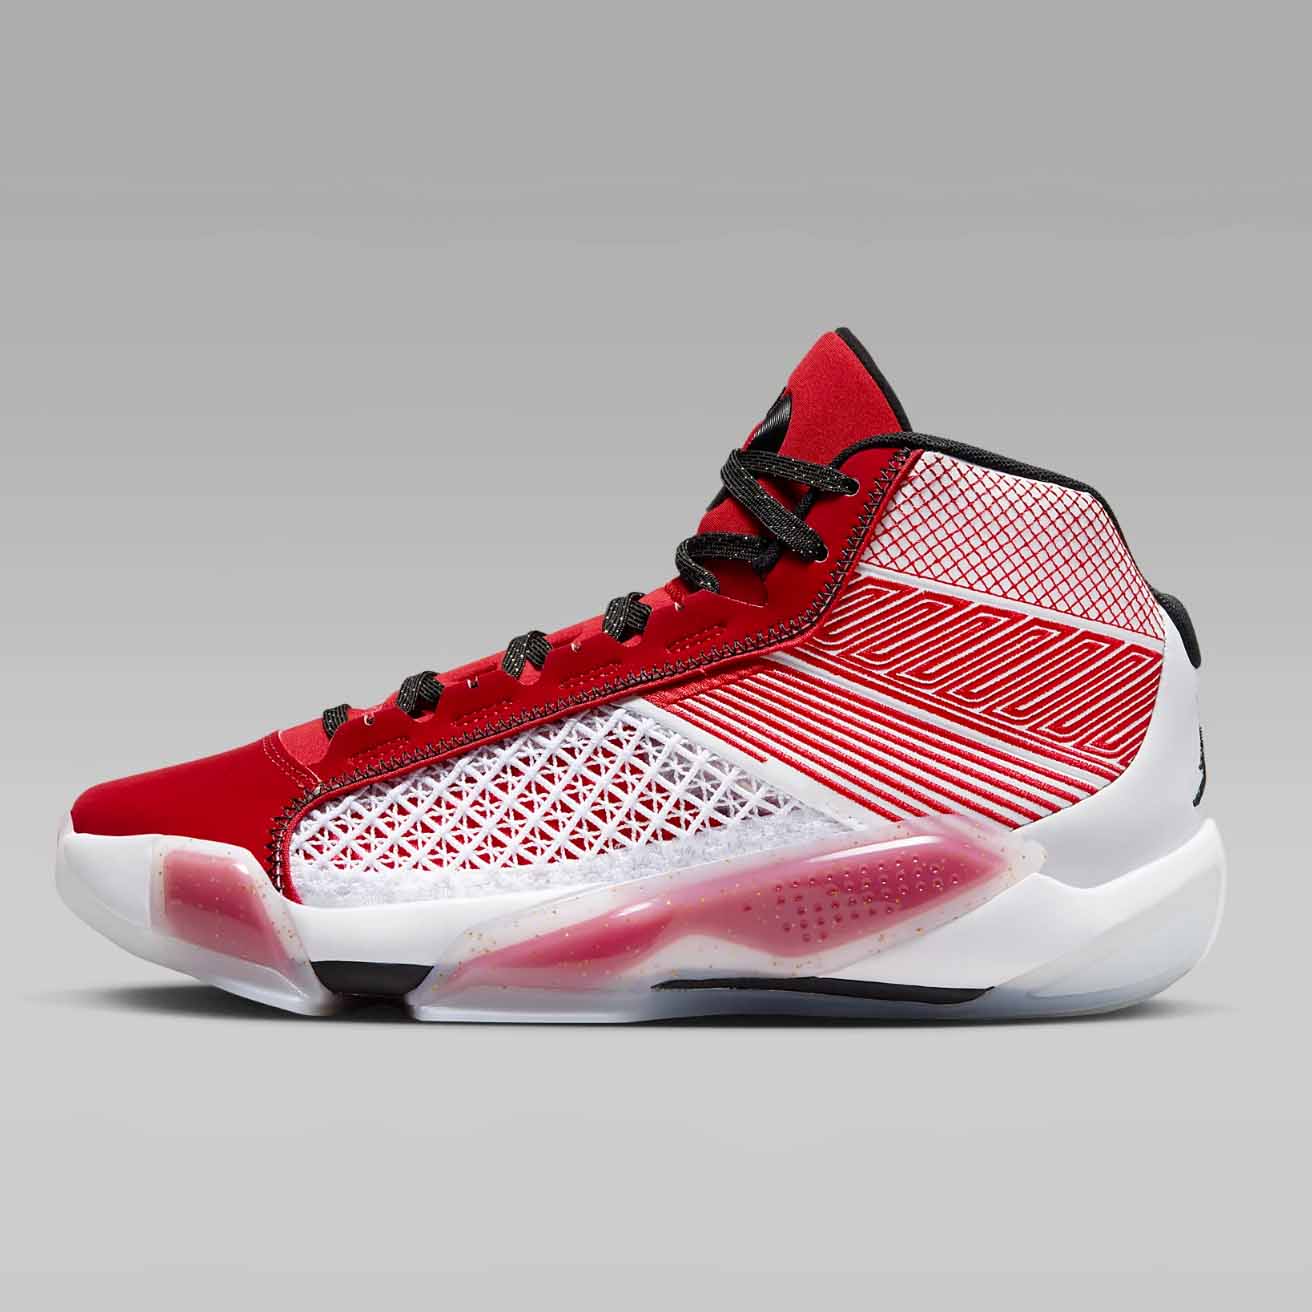 Air Jordan XXXVIII "Celebration" basketball shoes in red and white